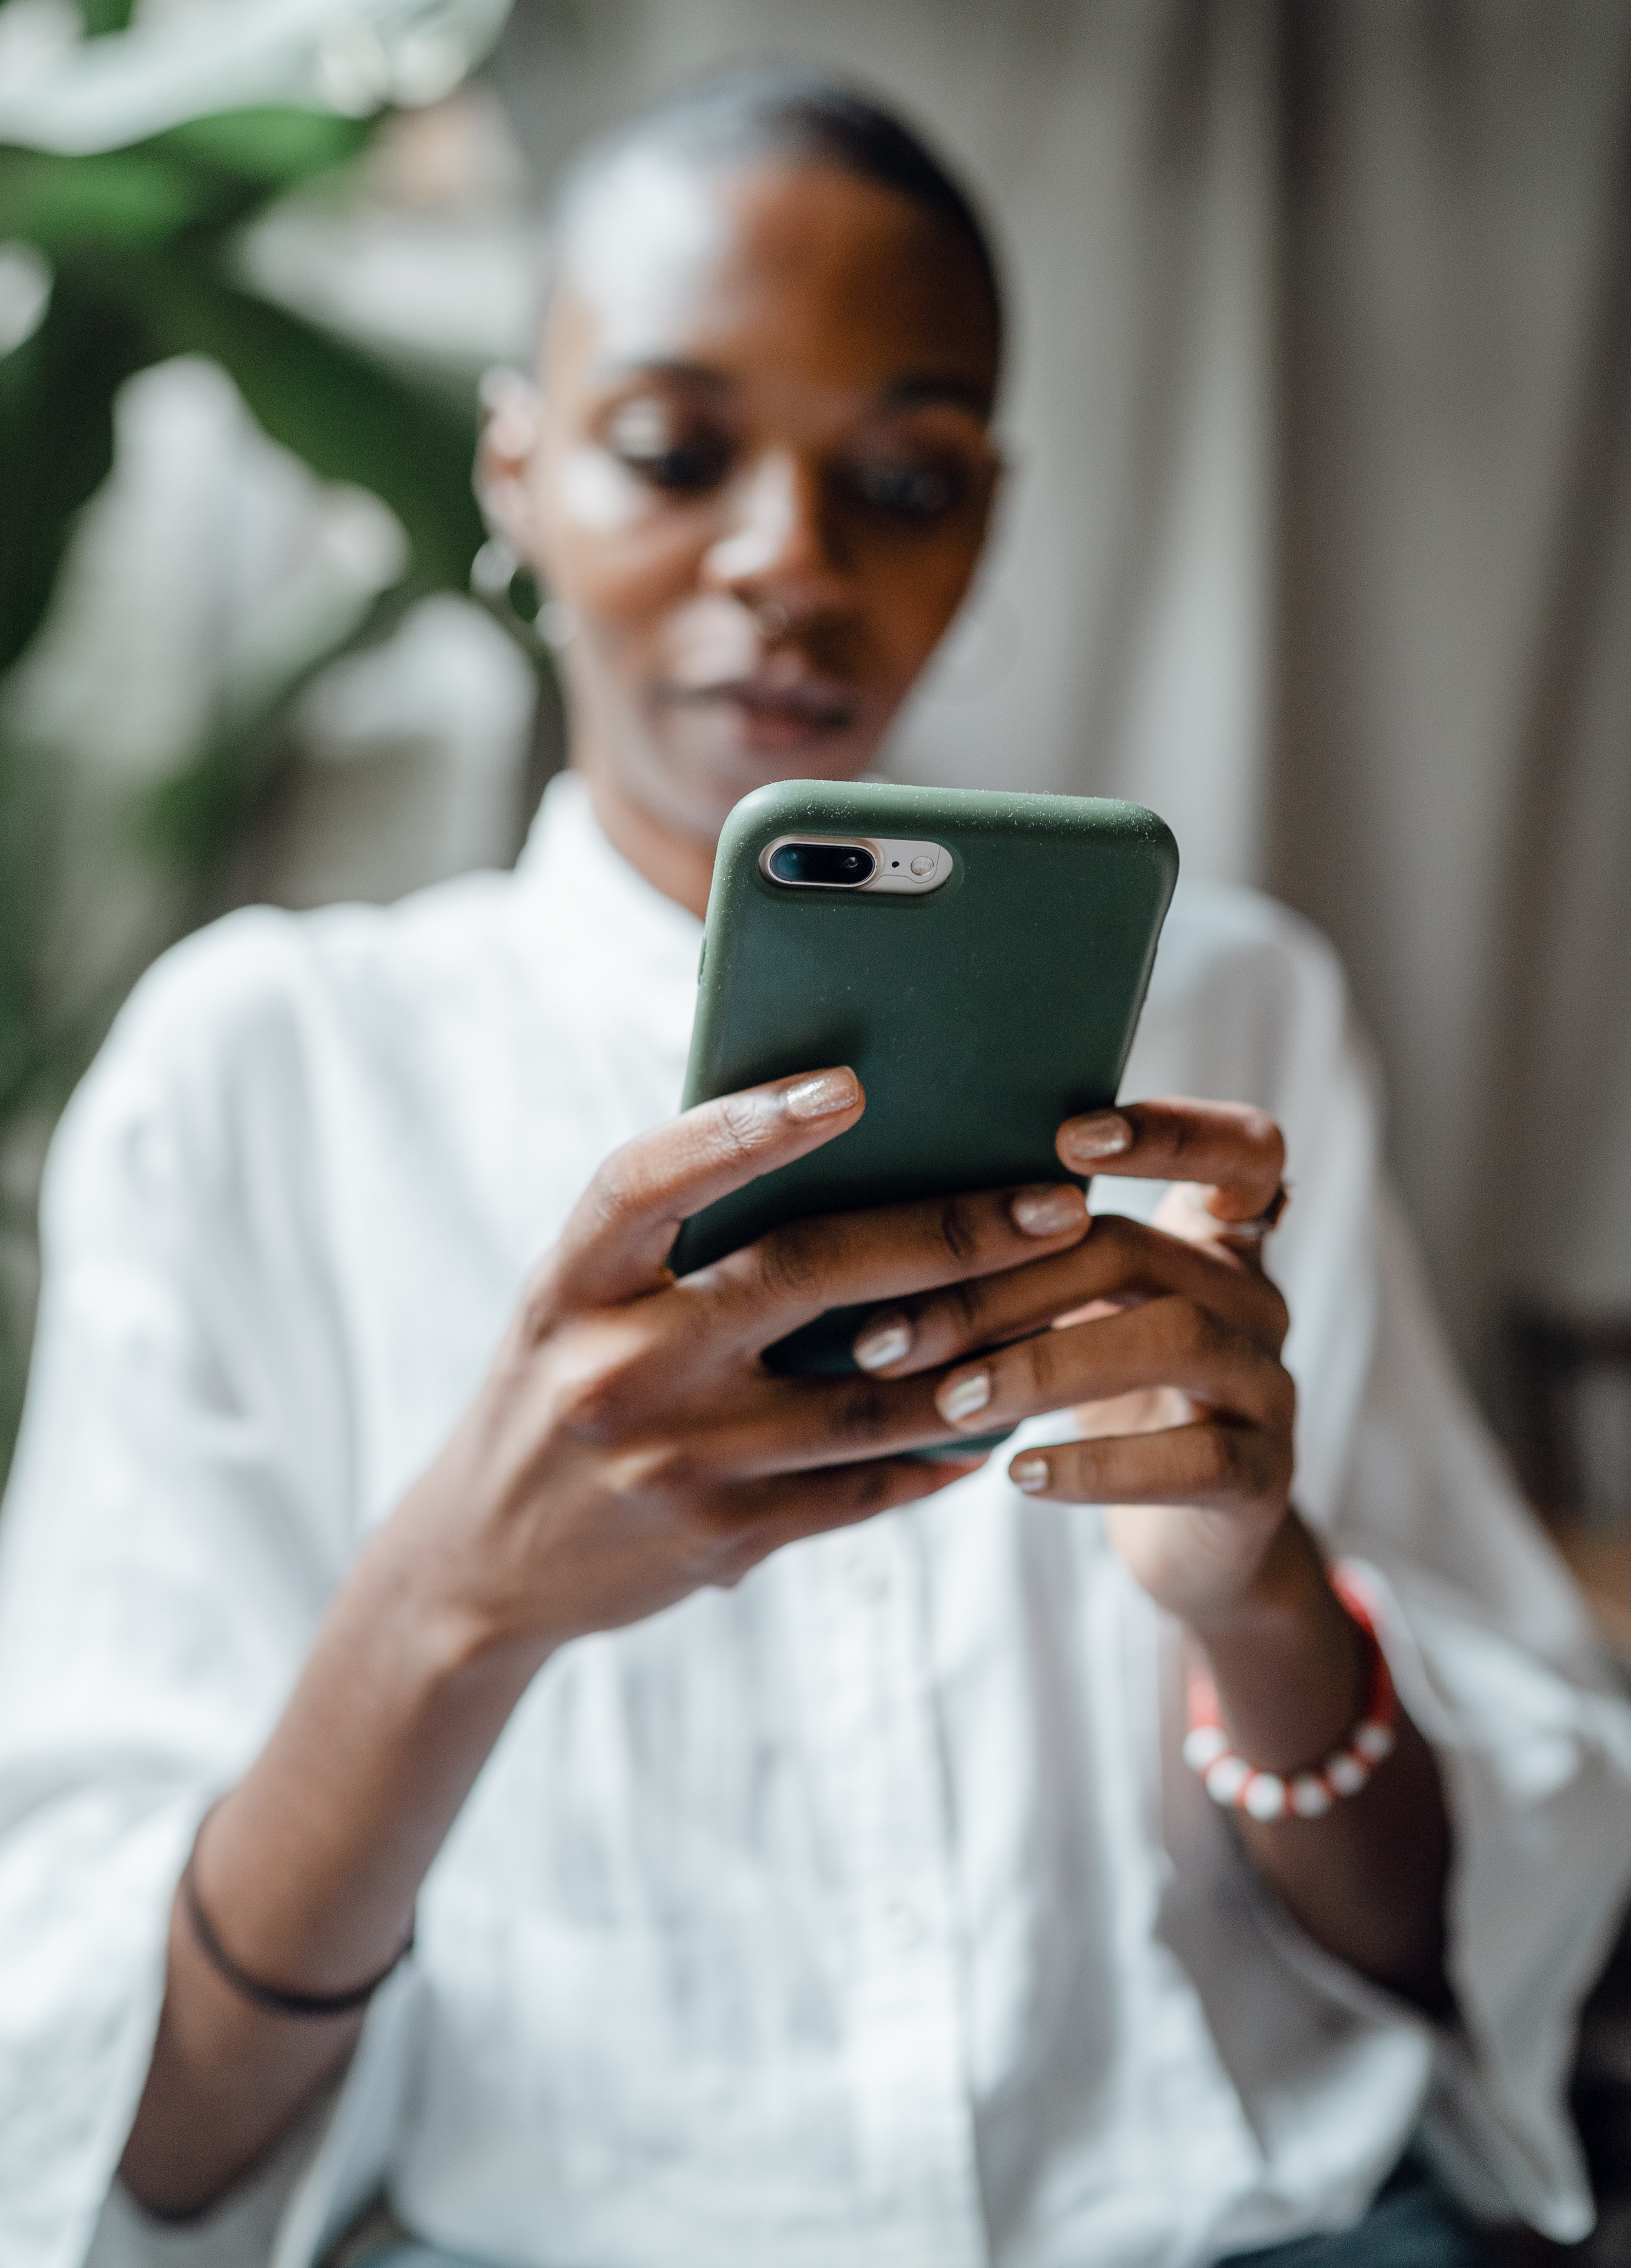 Black woman reading messages on phone | Source: Pexels